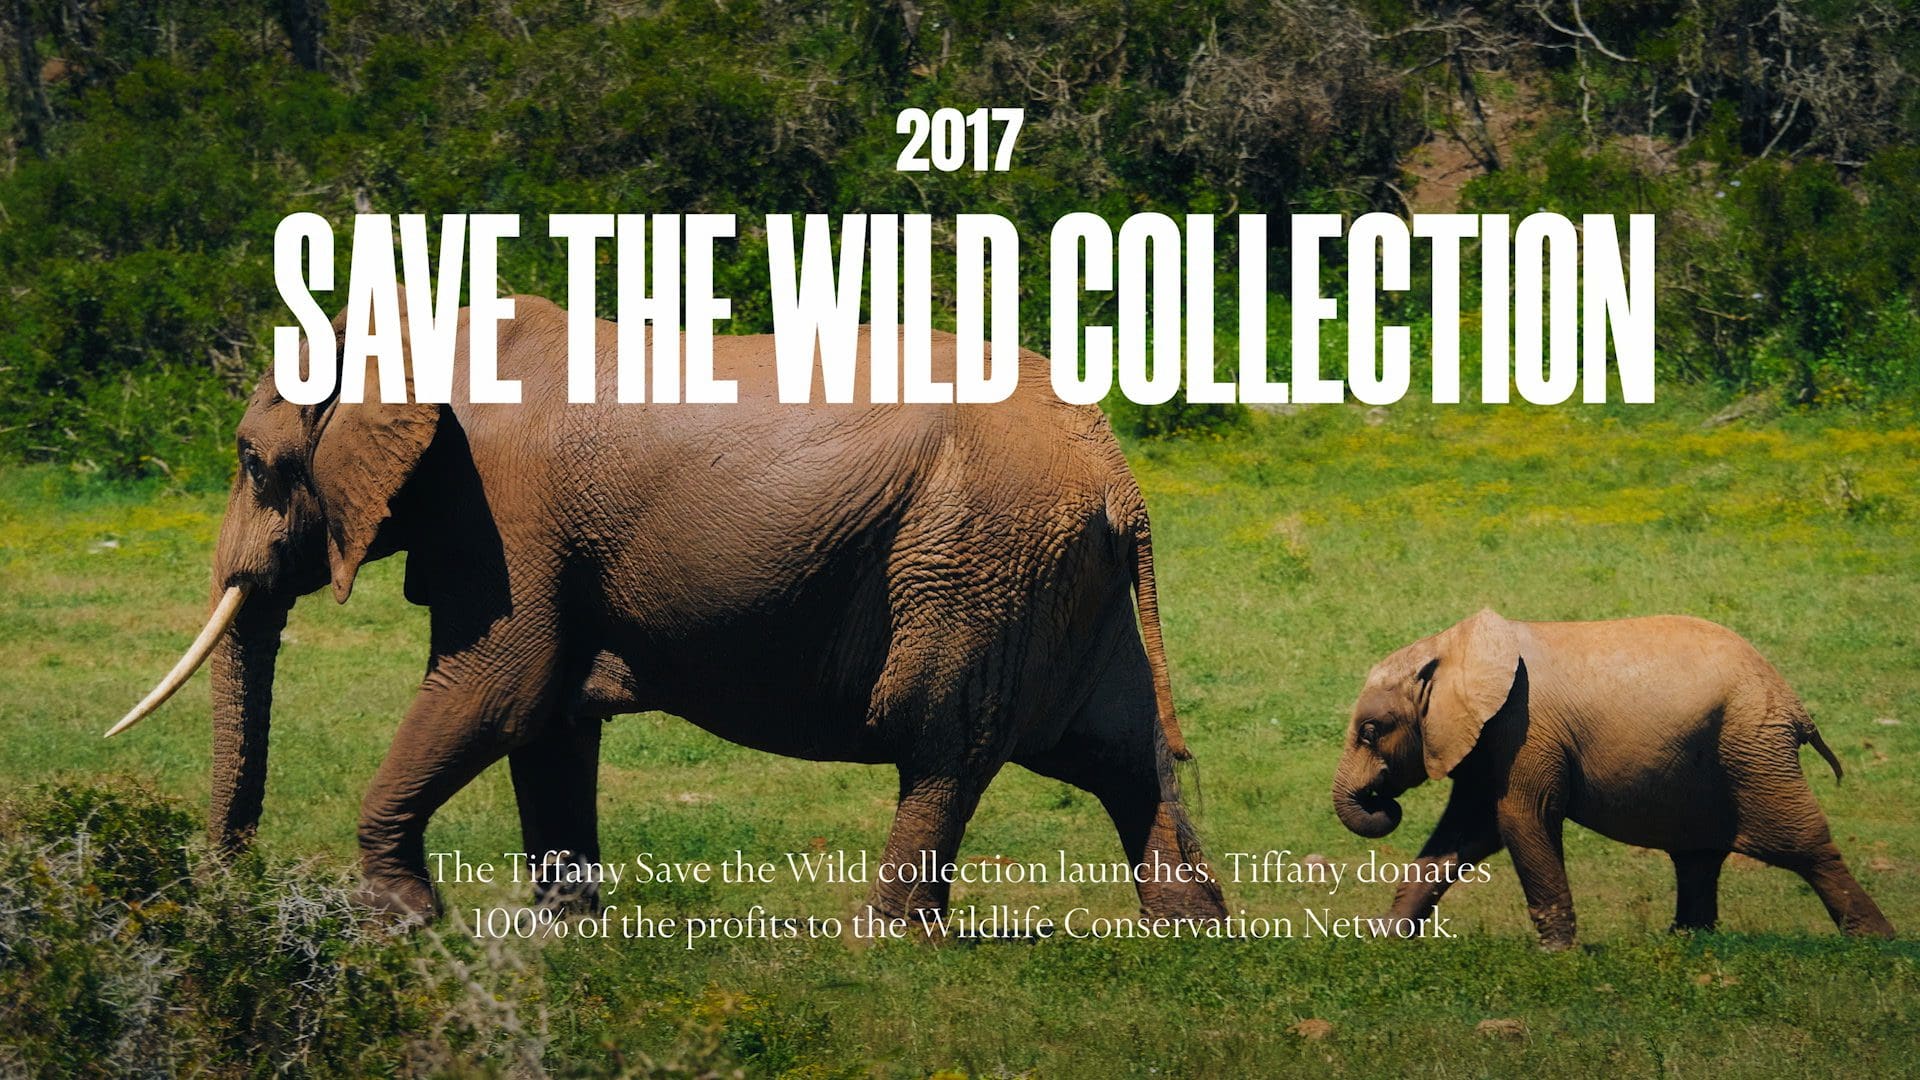 Promotional image for Tiffany & Co.'s 2017 Save the Wild Collection, depicting an adult elephant and its calf in the wild, with text stating that Tiffany donates 100% of the profits to the Wildlife Conservation Network.